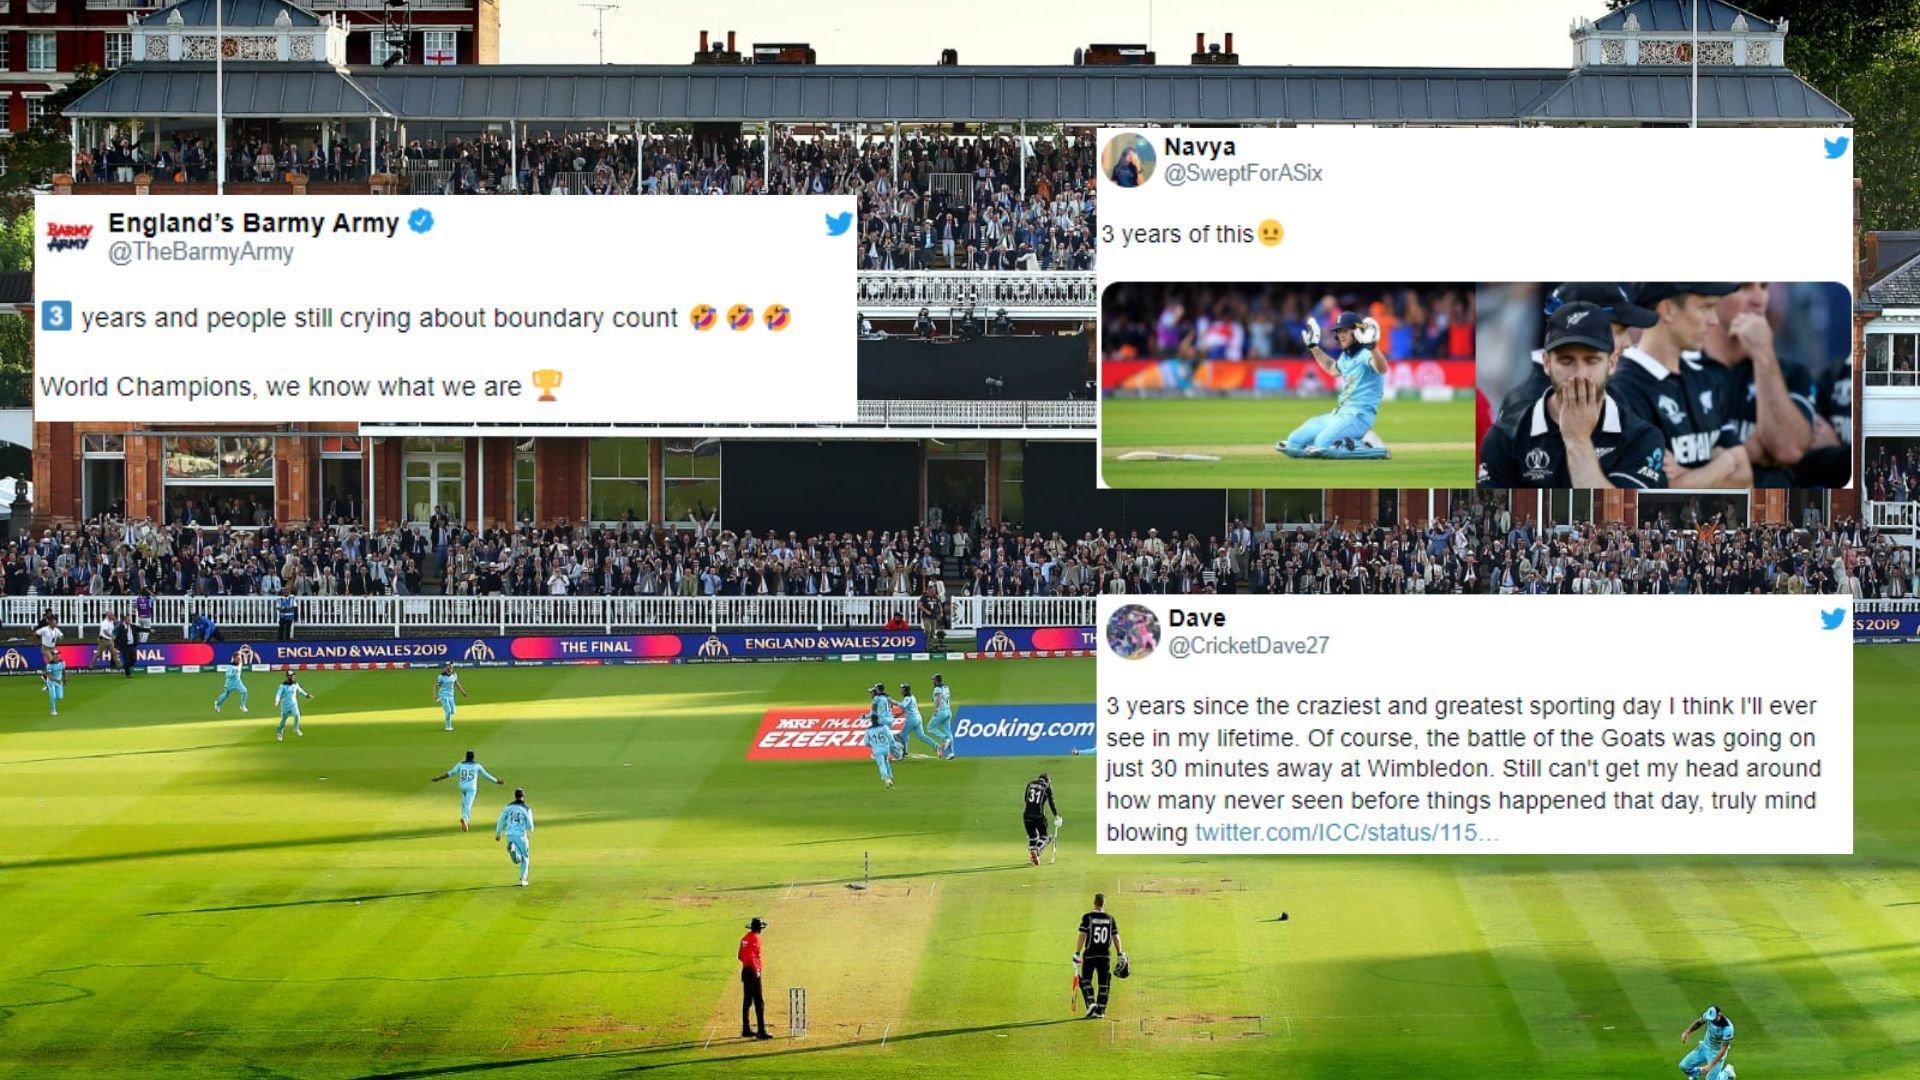 Lord&#039;s erupts as the hosts win the 2019 World Cup. (P.C.:Twitter)